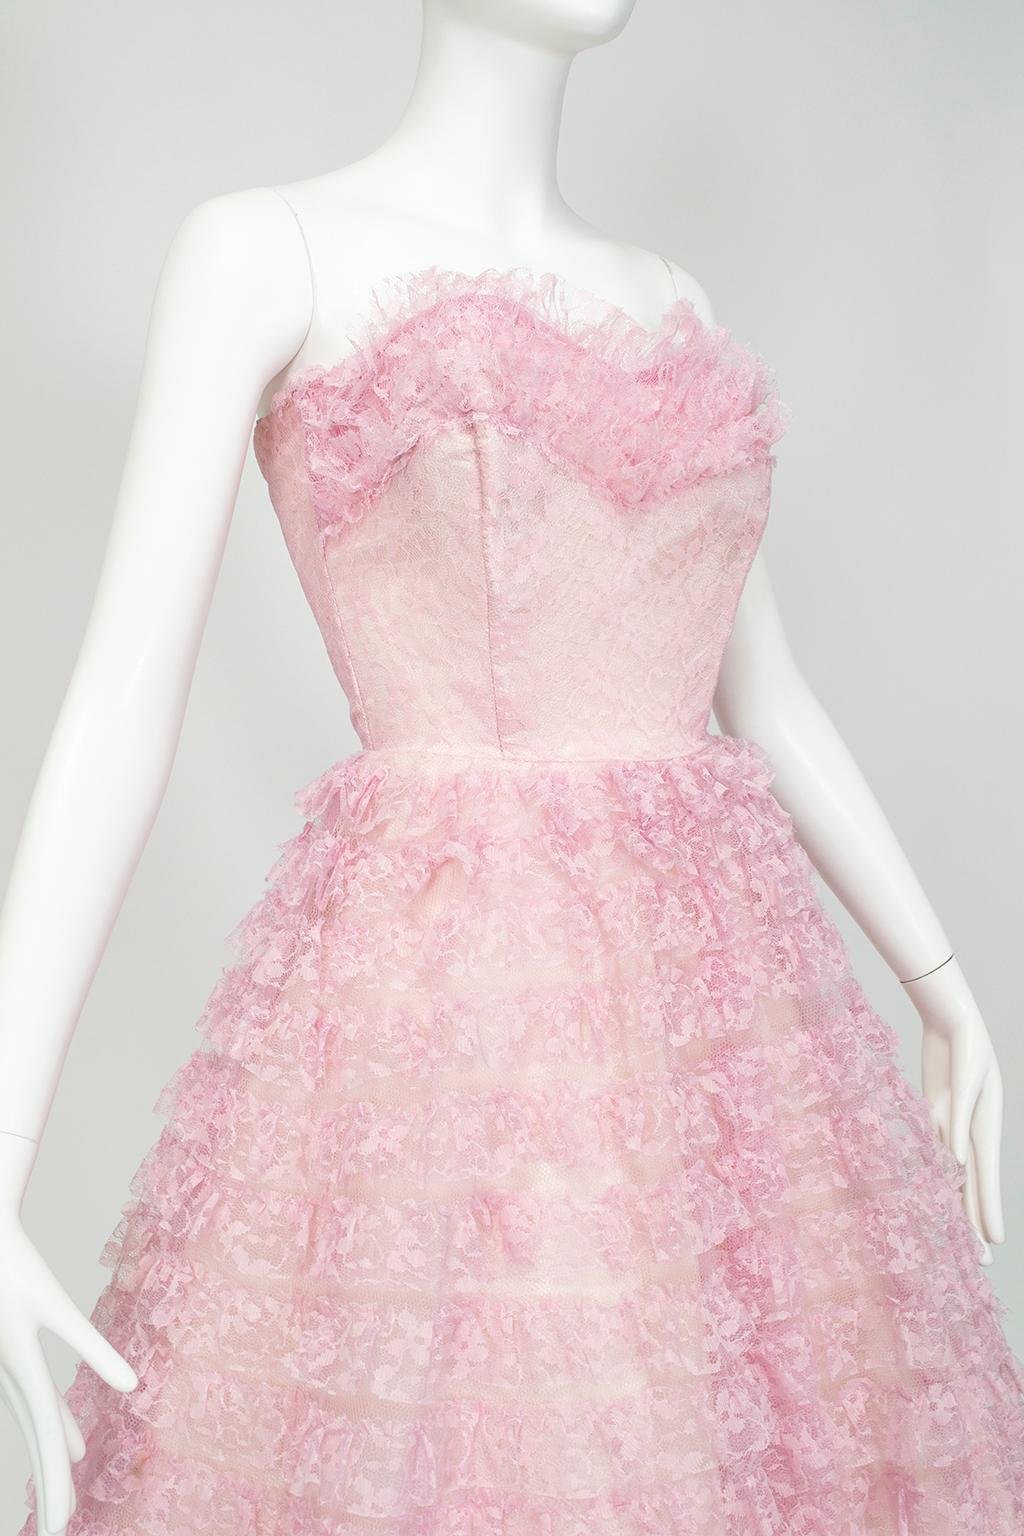 Women's Pink-Lavender New Look Strapless Tiered Lace Ballerina Party Dress – S-M, 1950s For Sale